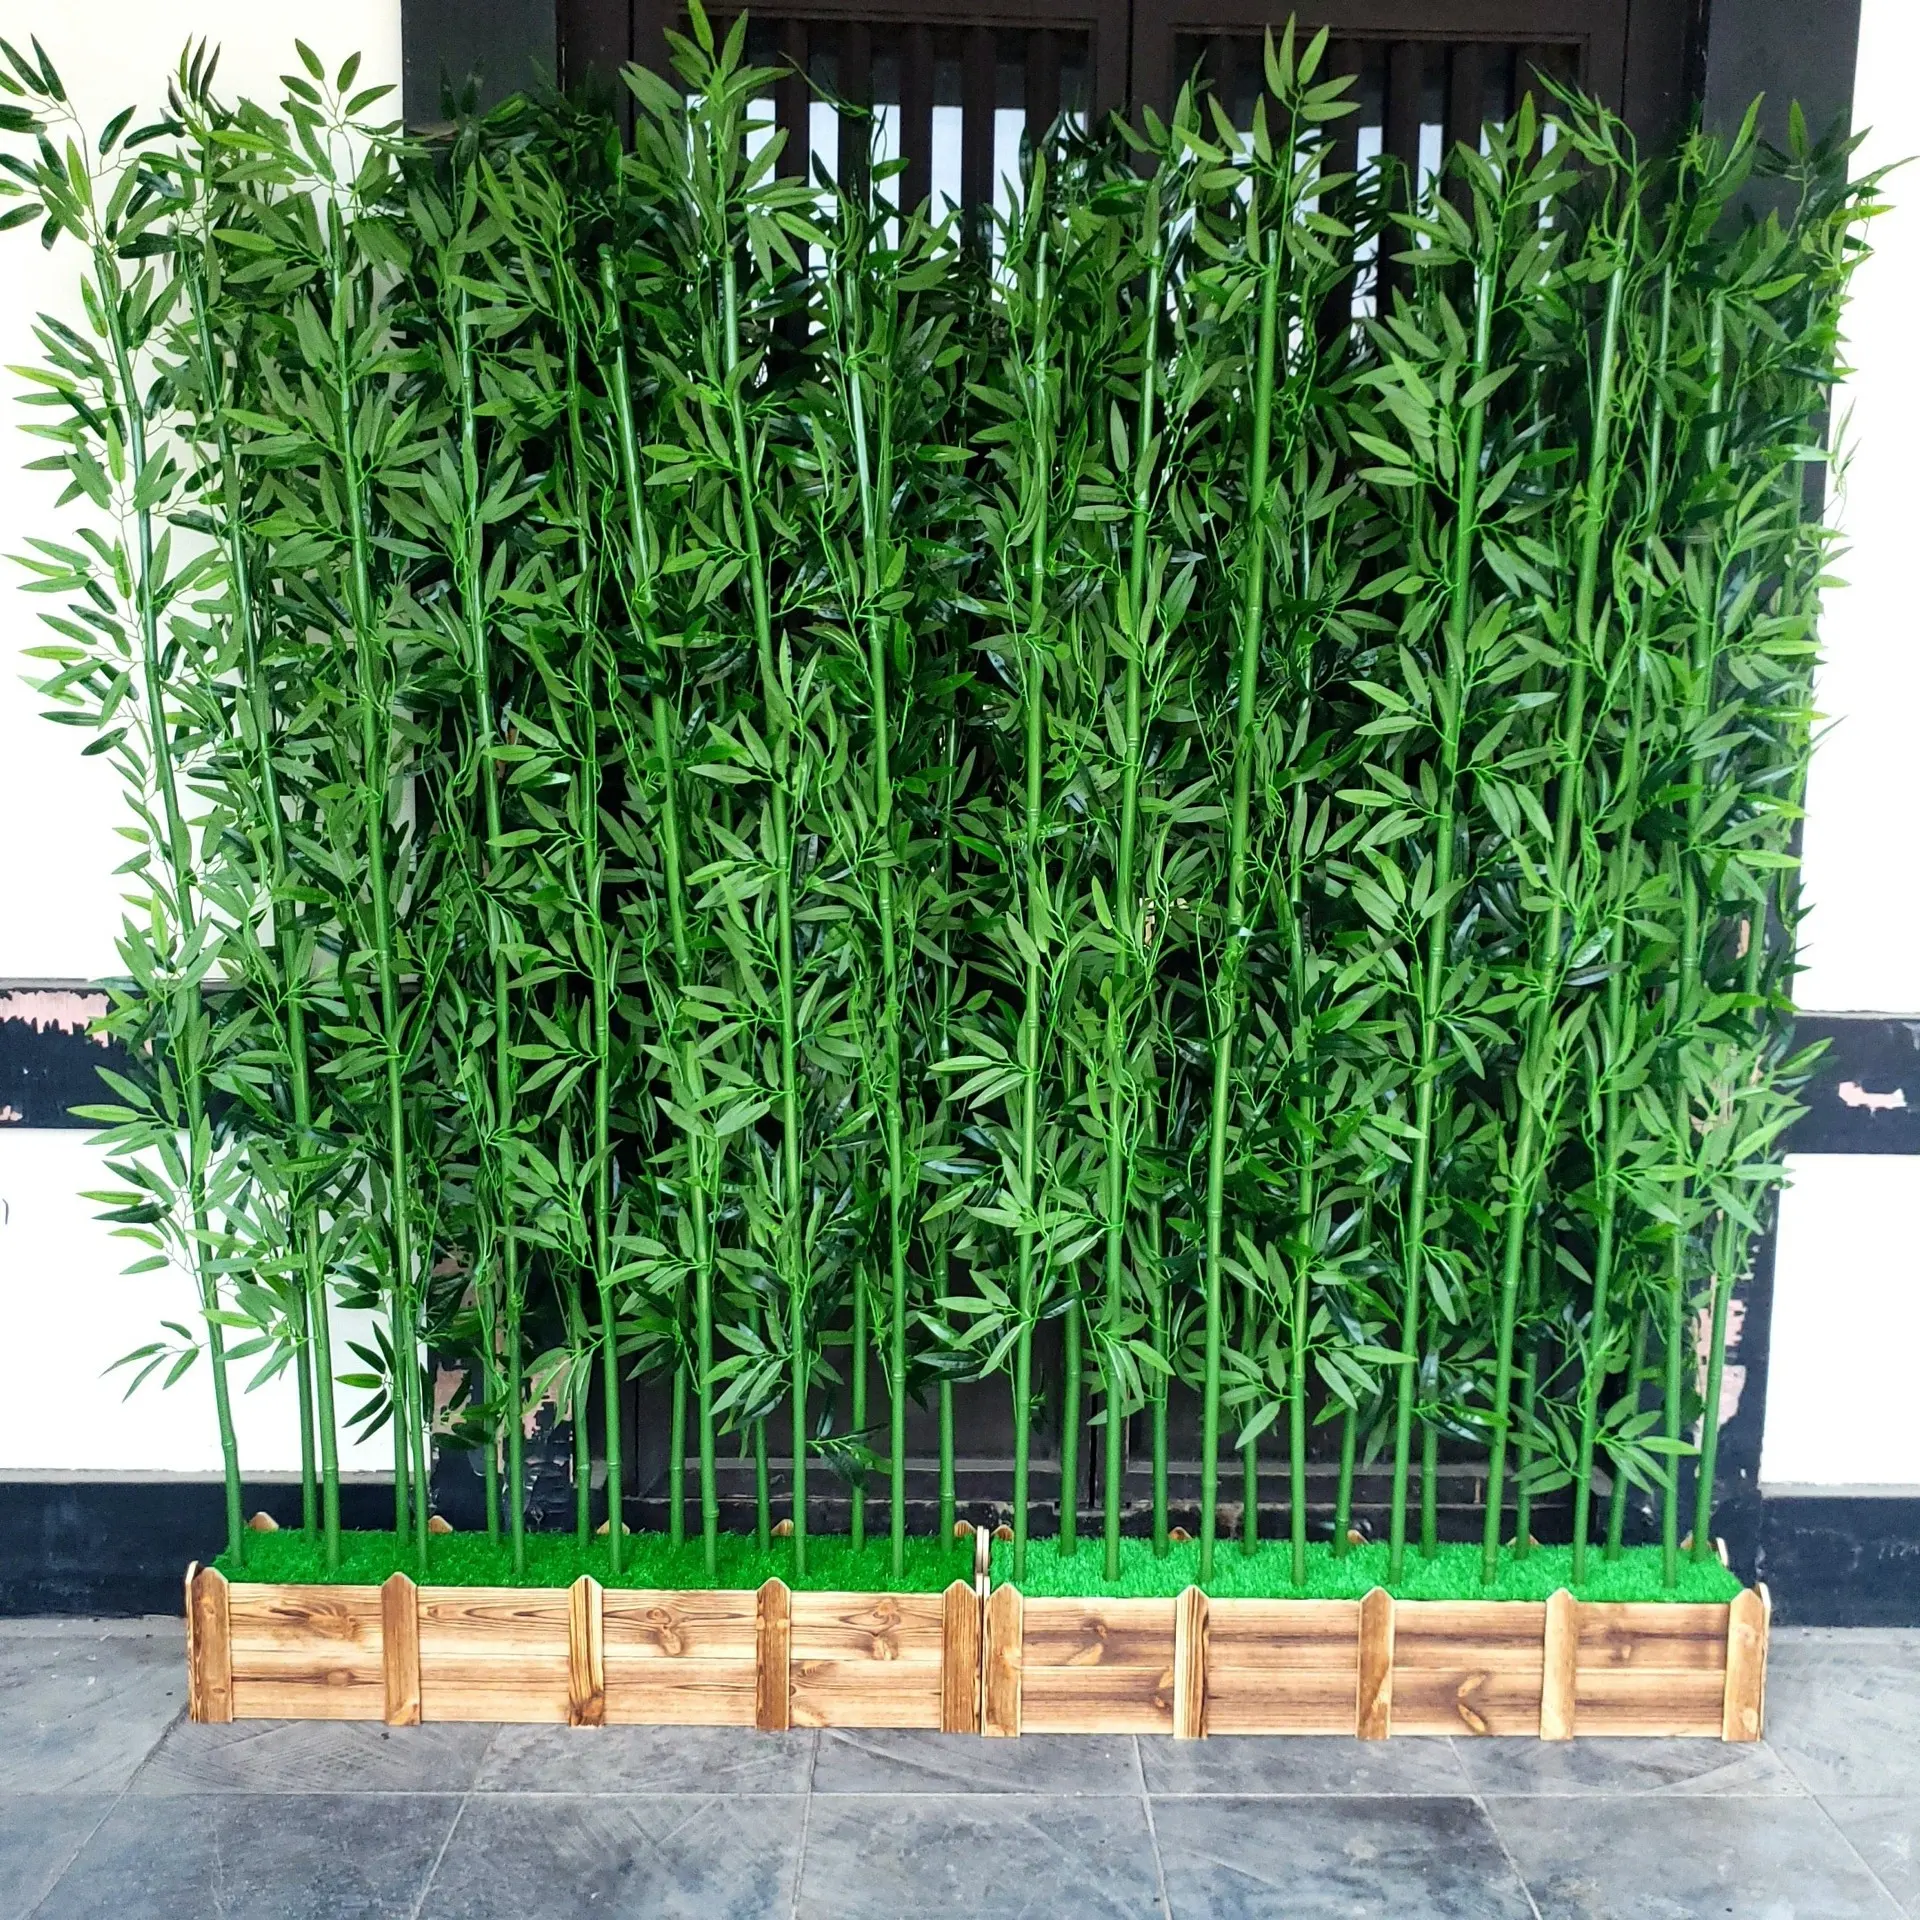 W-271 Odourless Plastic Indoor Decorative Waterproof Large Green Bamboo Artificial Plants Bamboo for home decoration